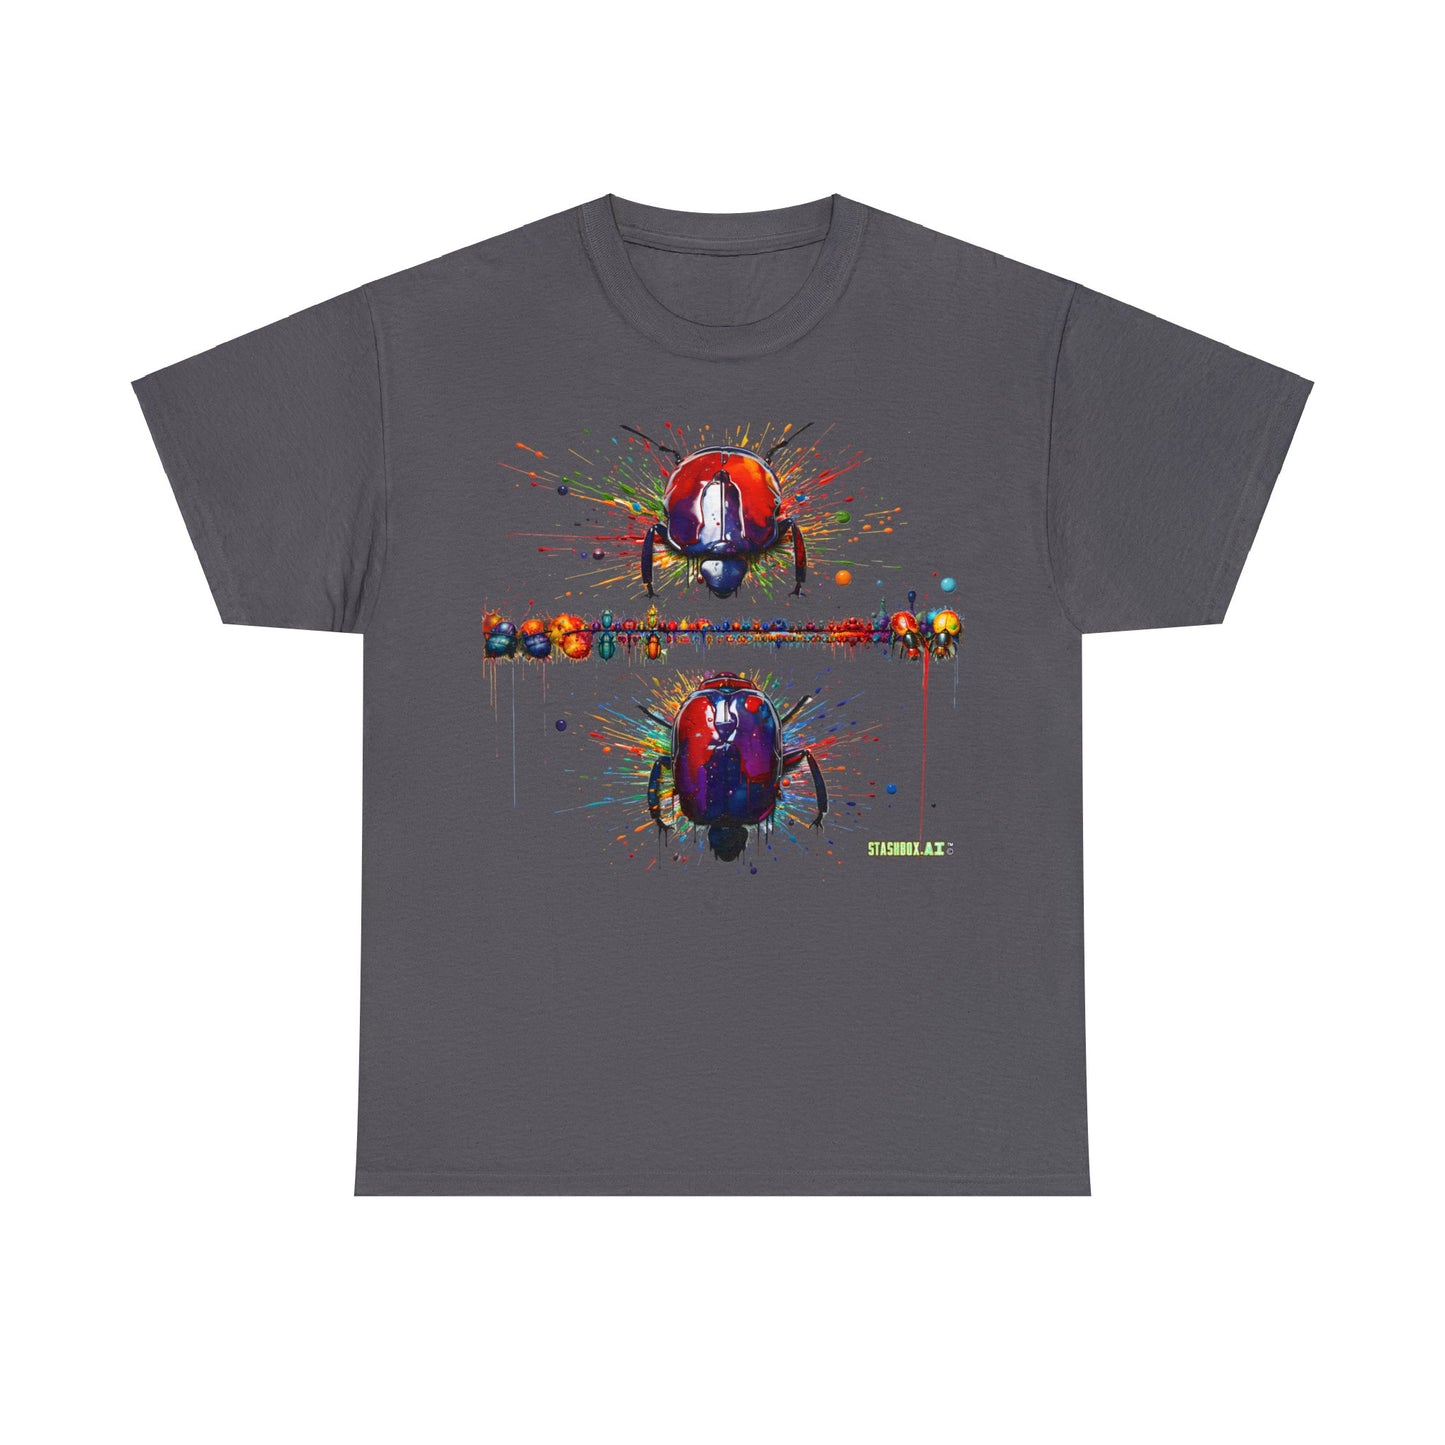 Unisex Adult Size Heavy Cotton Tee Colorful Bugs 005 T-Shirt